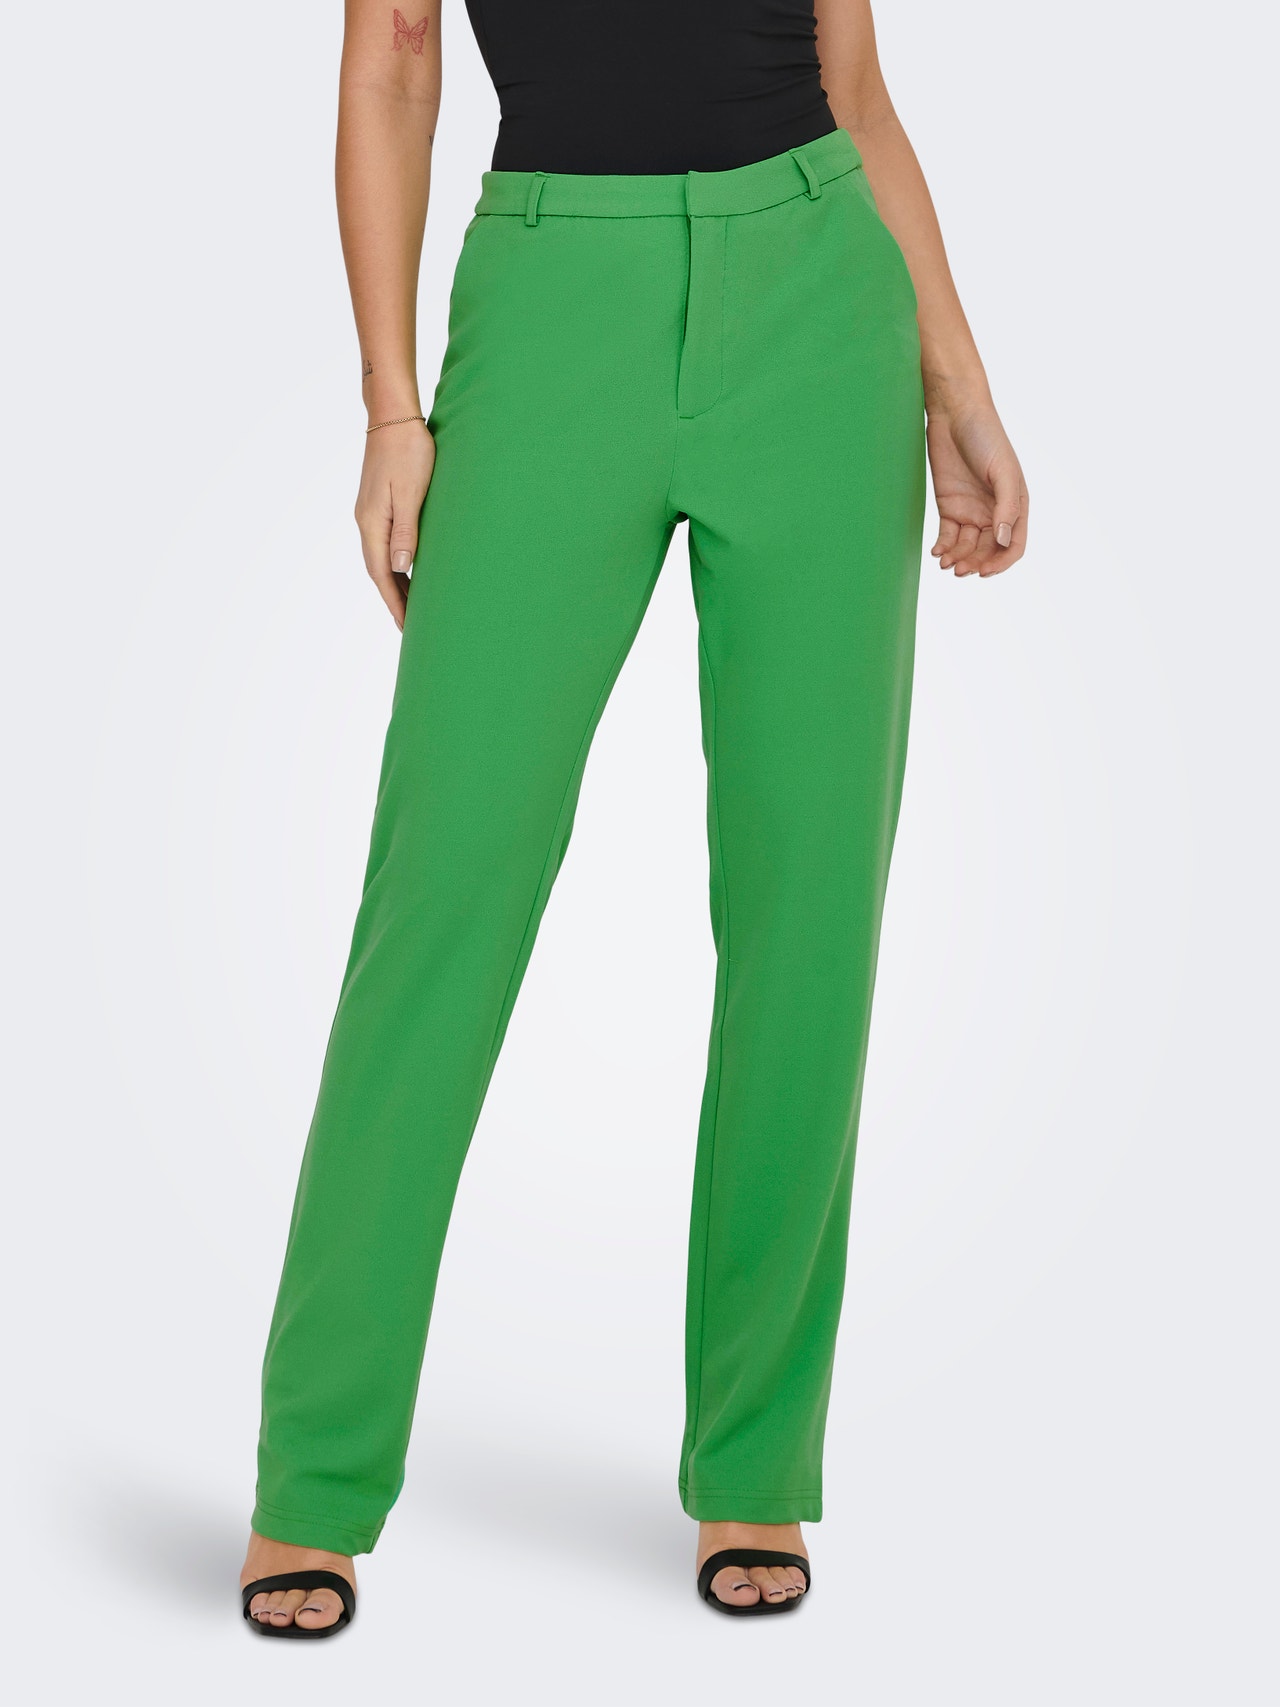 ONLY Straight Fit Trousers -Kelly Green - 15266403